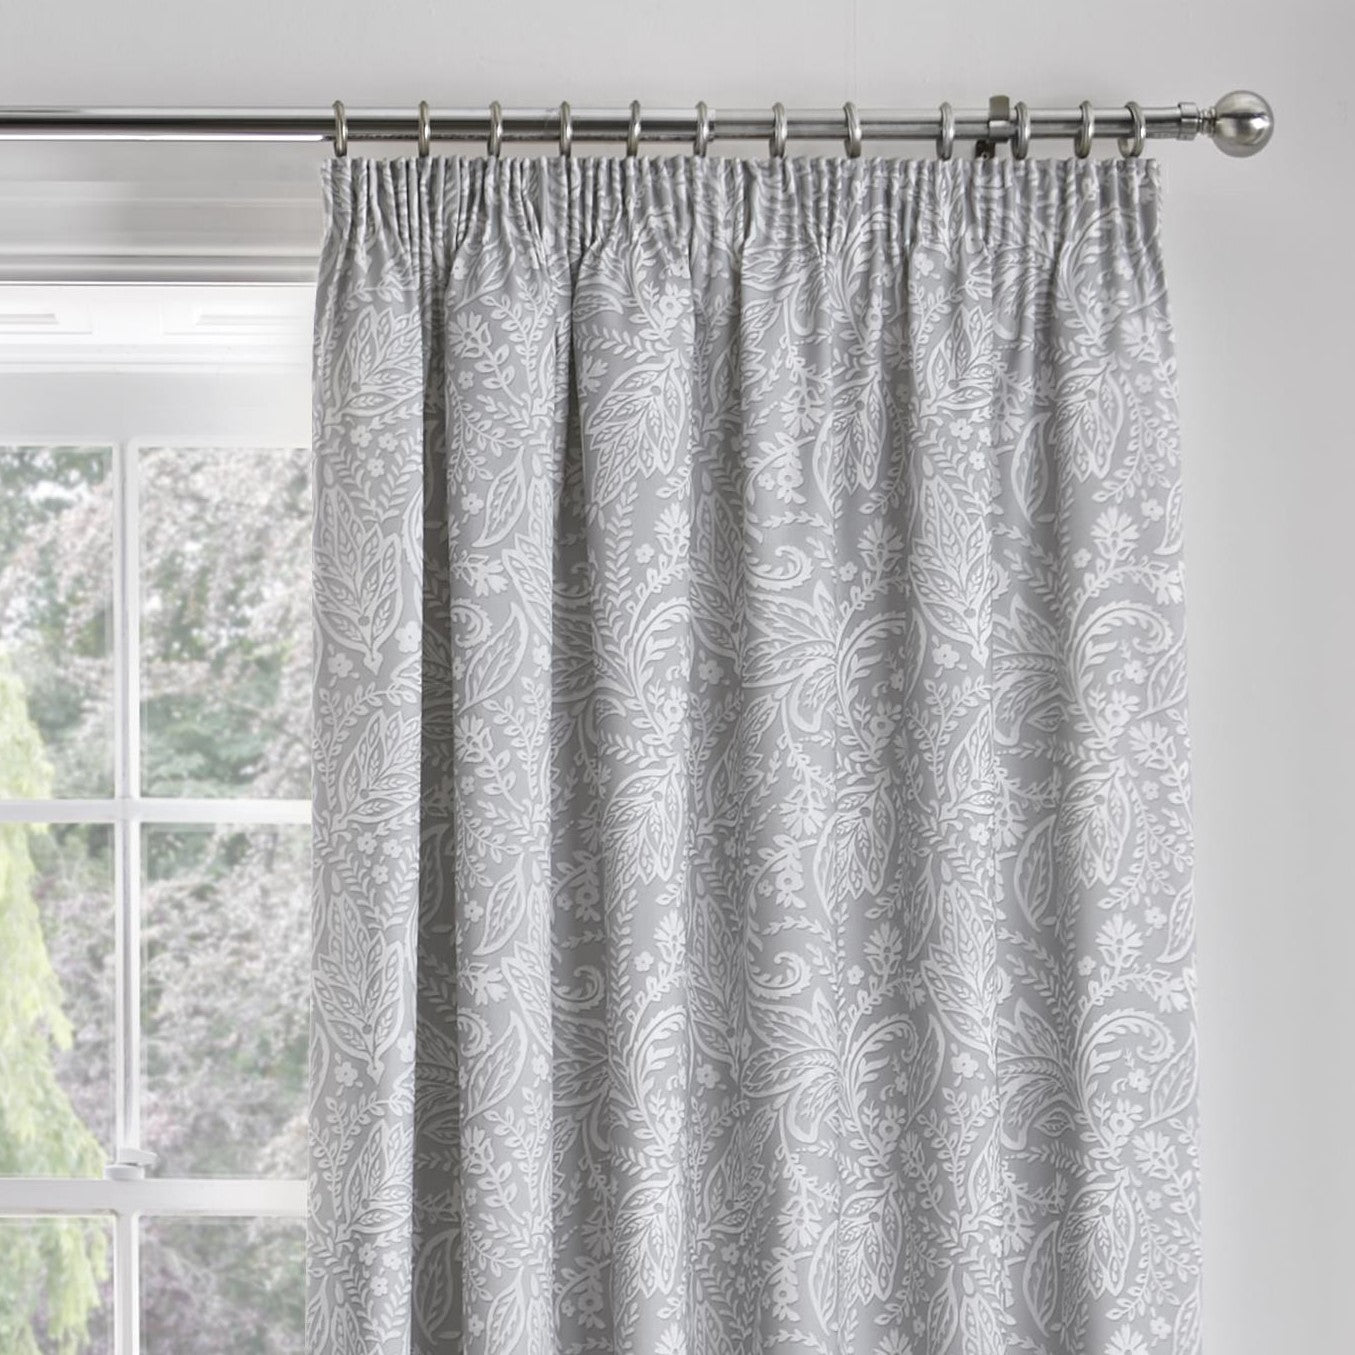 Pair of Pencil Pleat Curtains With Tie-Backs Aveline by D&D in Grey